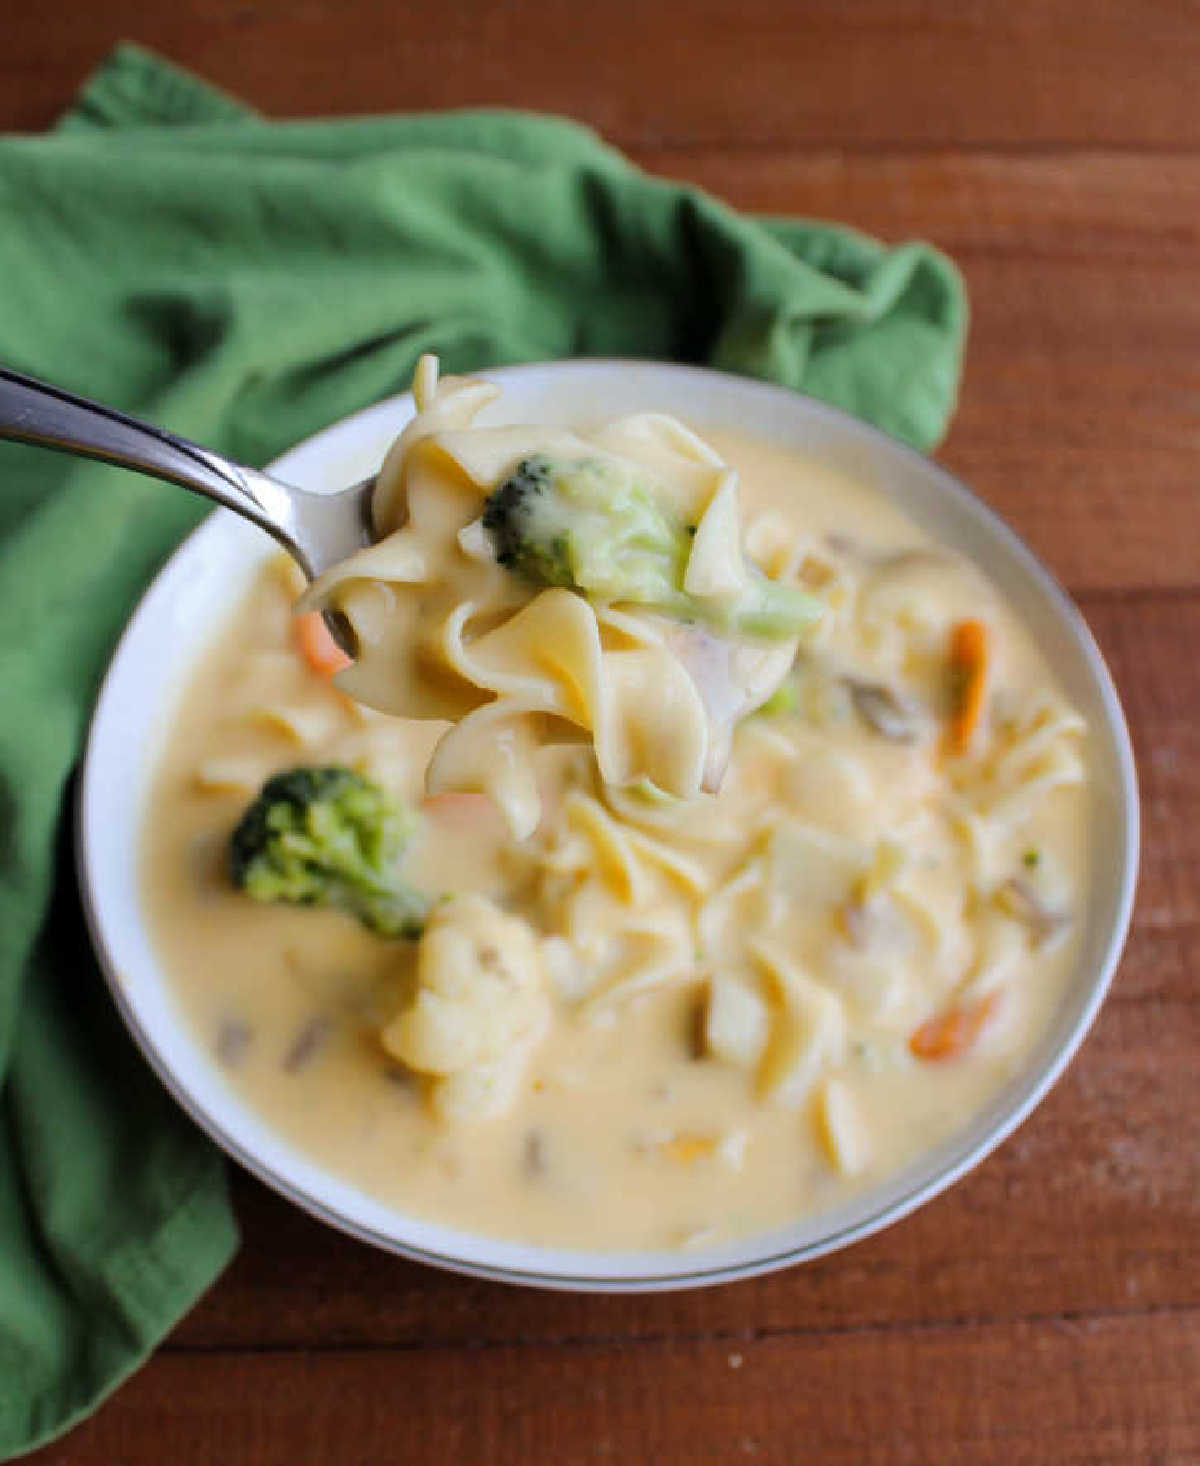 spoonful of kelly's cheese soup with wide egg noodles, broccoli, cauliflower and more.